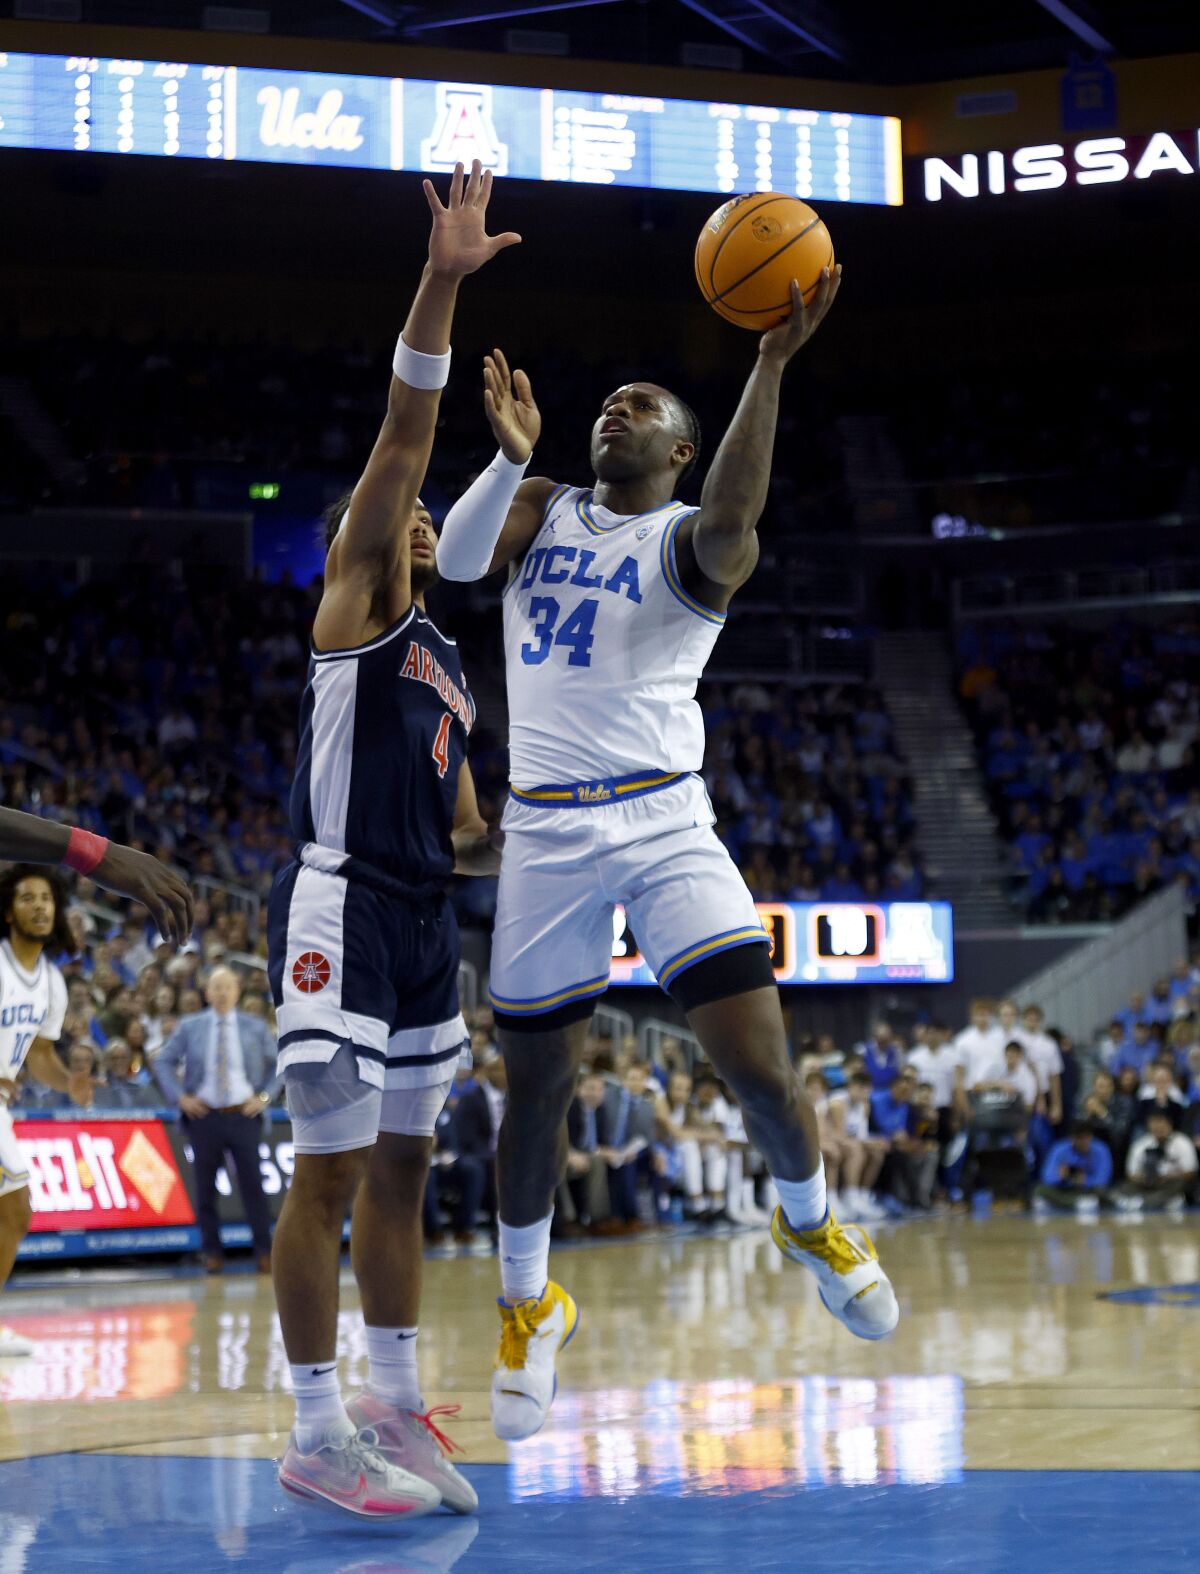 The Bruins' David Singleton goes up for a shot against the Wildcats' Kylan Boswell.